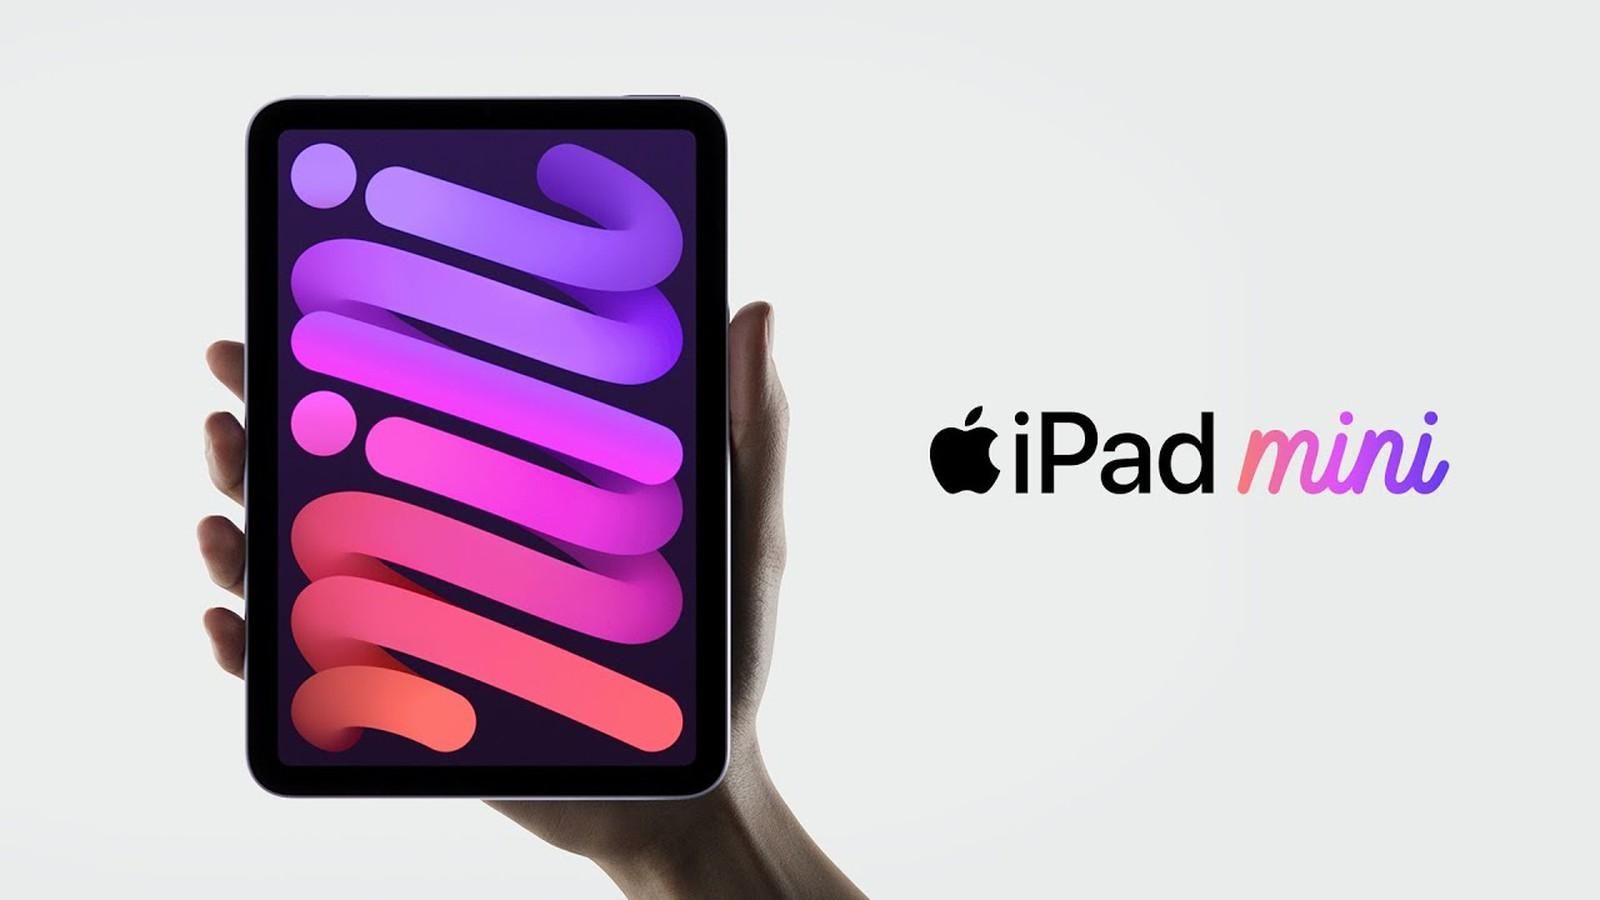 Next-gen iPad mini could feature ProMotion 120Hz display